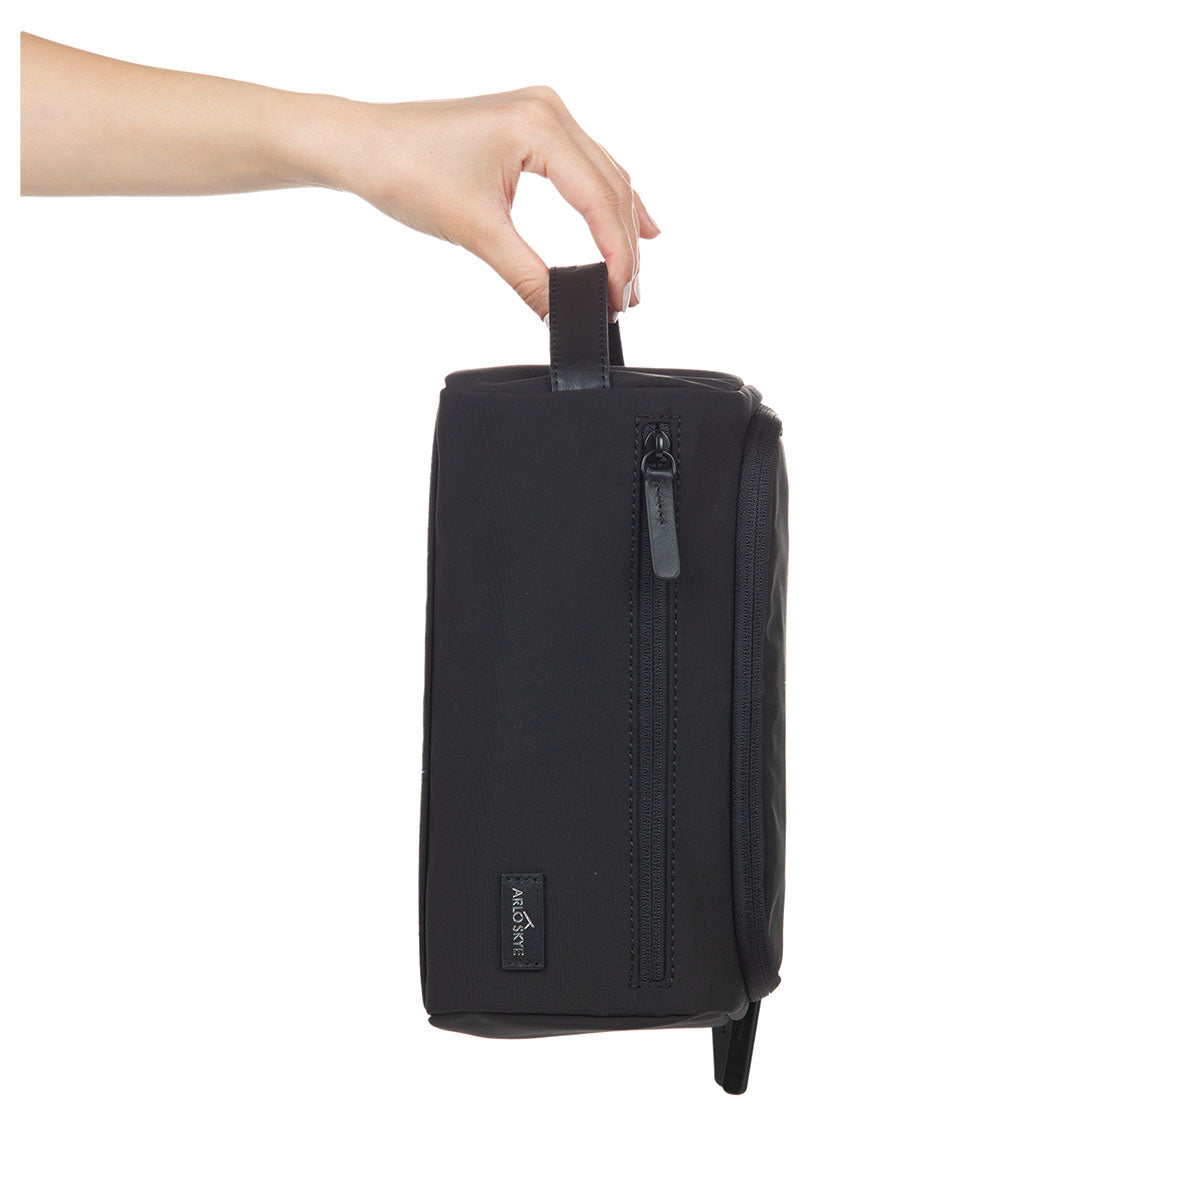 toiletry bag in black color showing exterior view in vertical orientation.